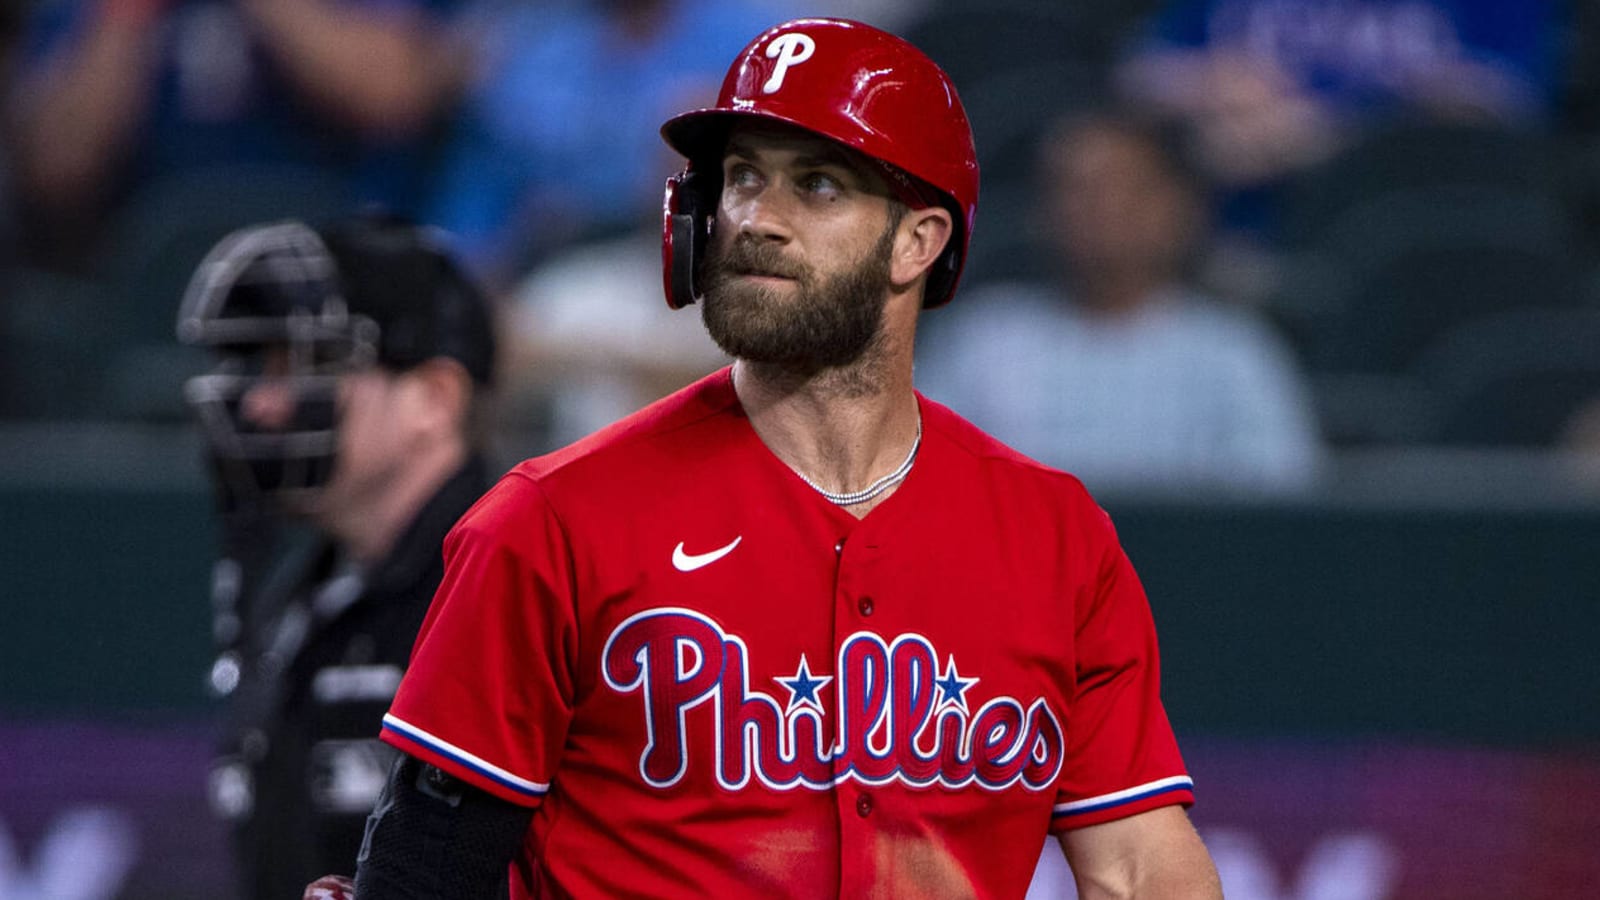 Bryce Harper's strength is back, and the Phillies star counts his blessings